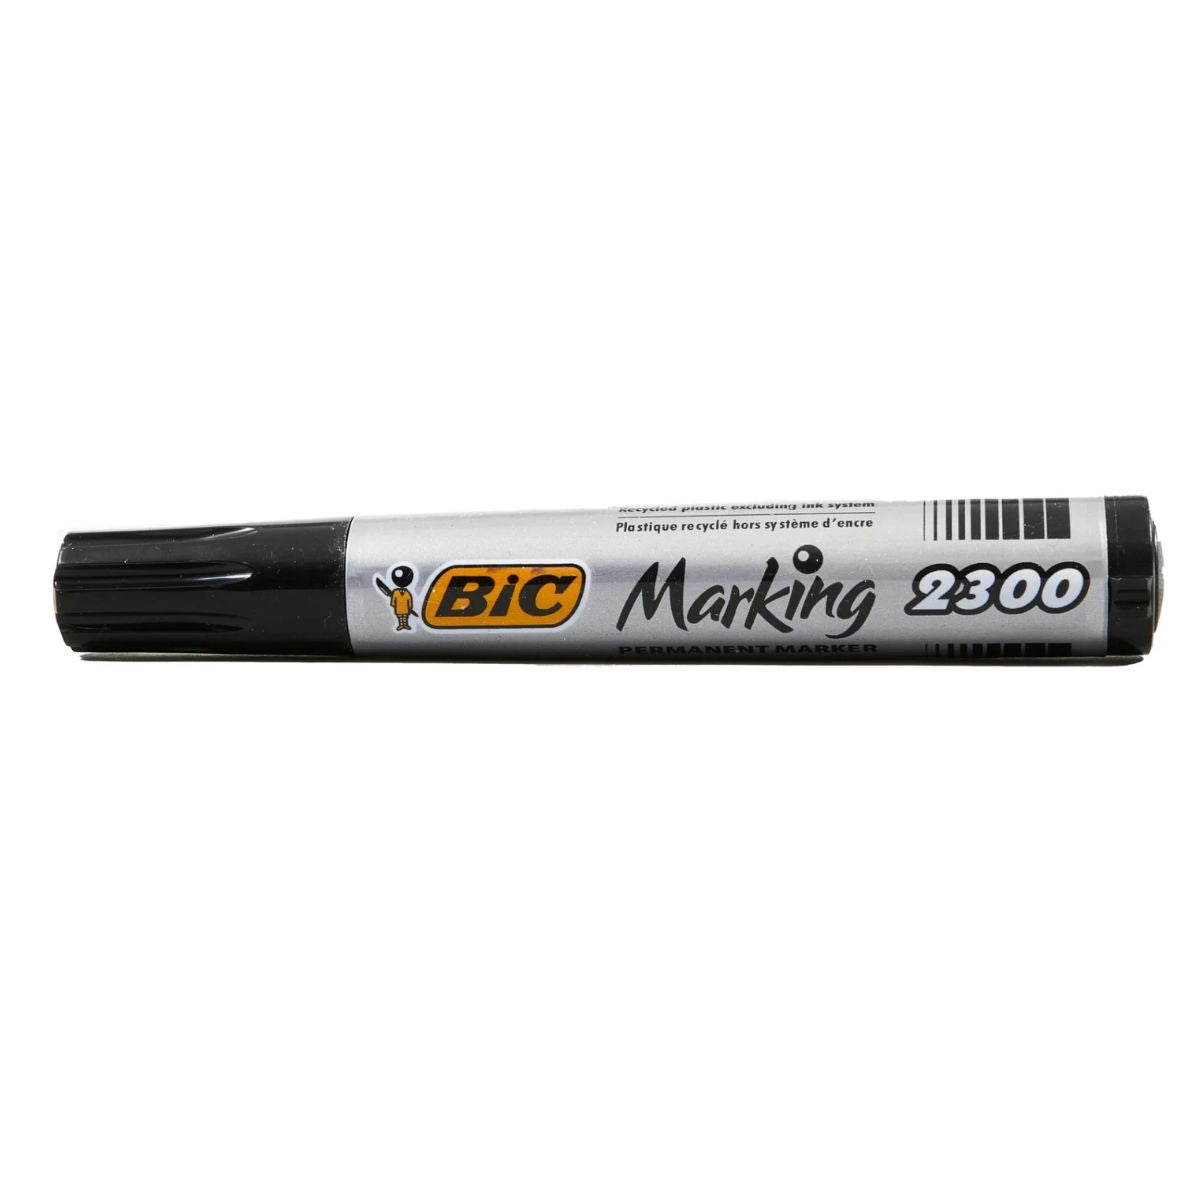 A Bic Marker Pen on a white background.